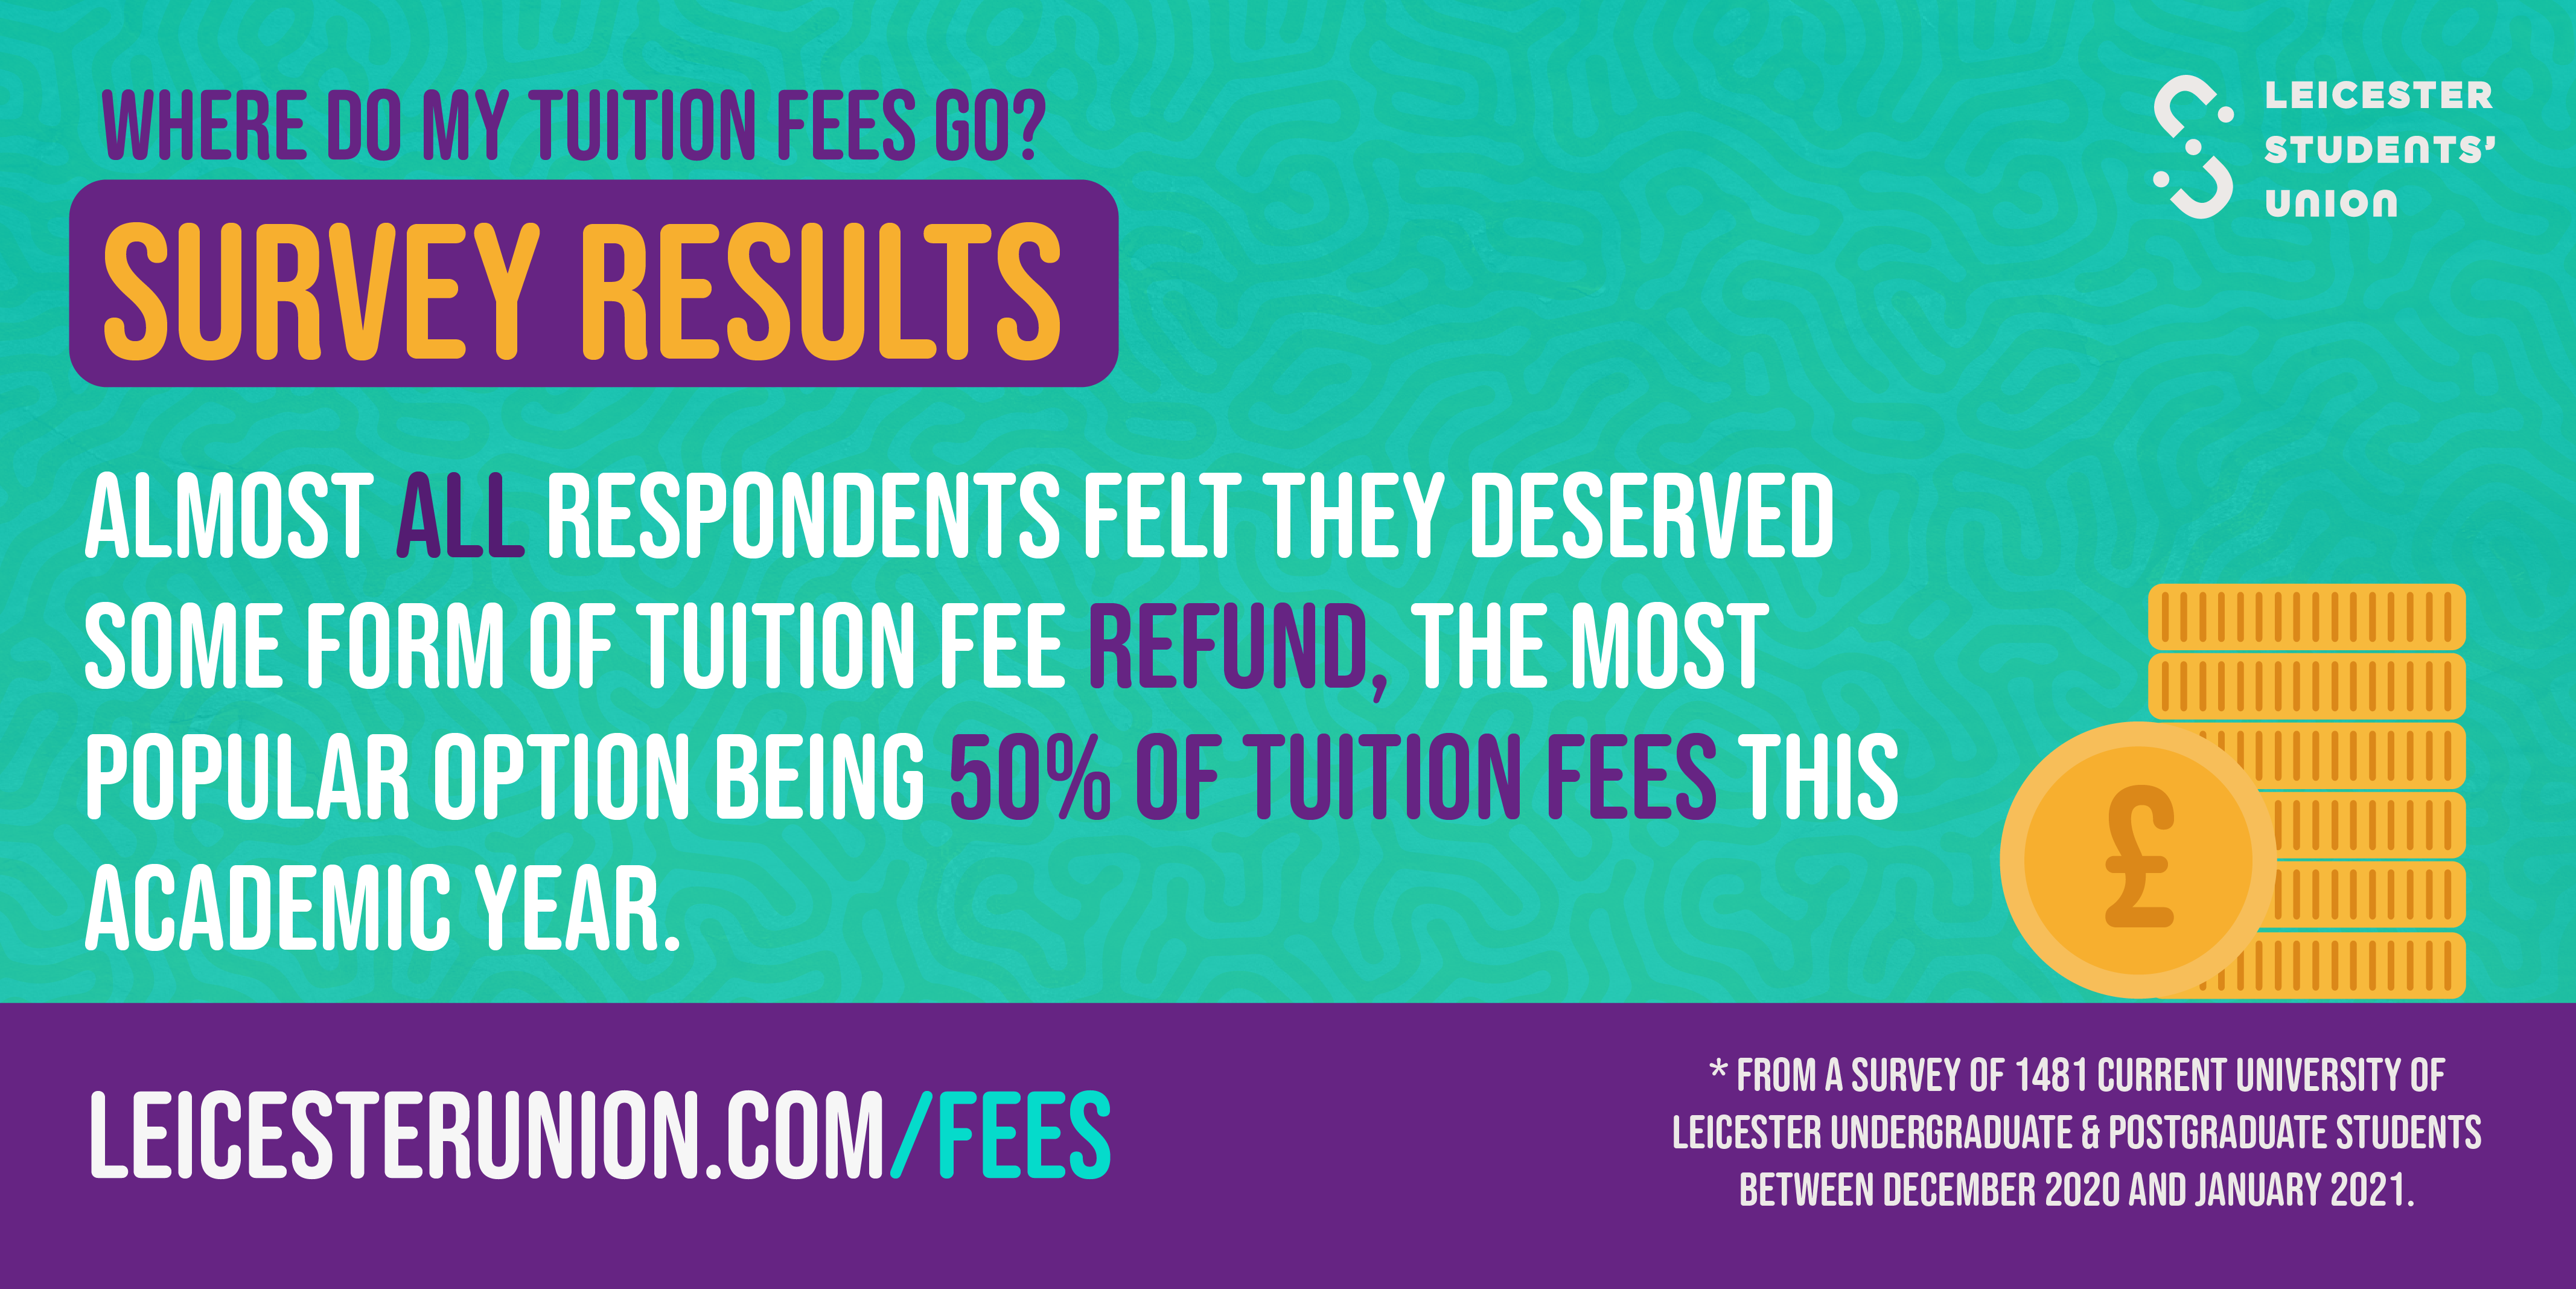 almost ALL respondents felt they deserved some form of tuition fee refund, the most popular option being 50% of tuition fees this academic year.